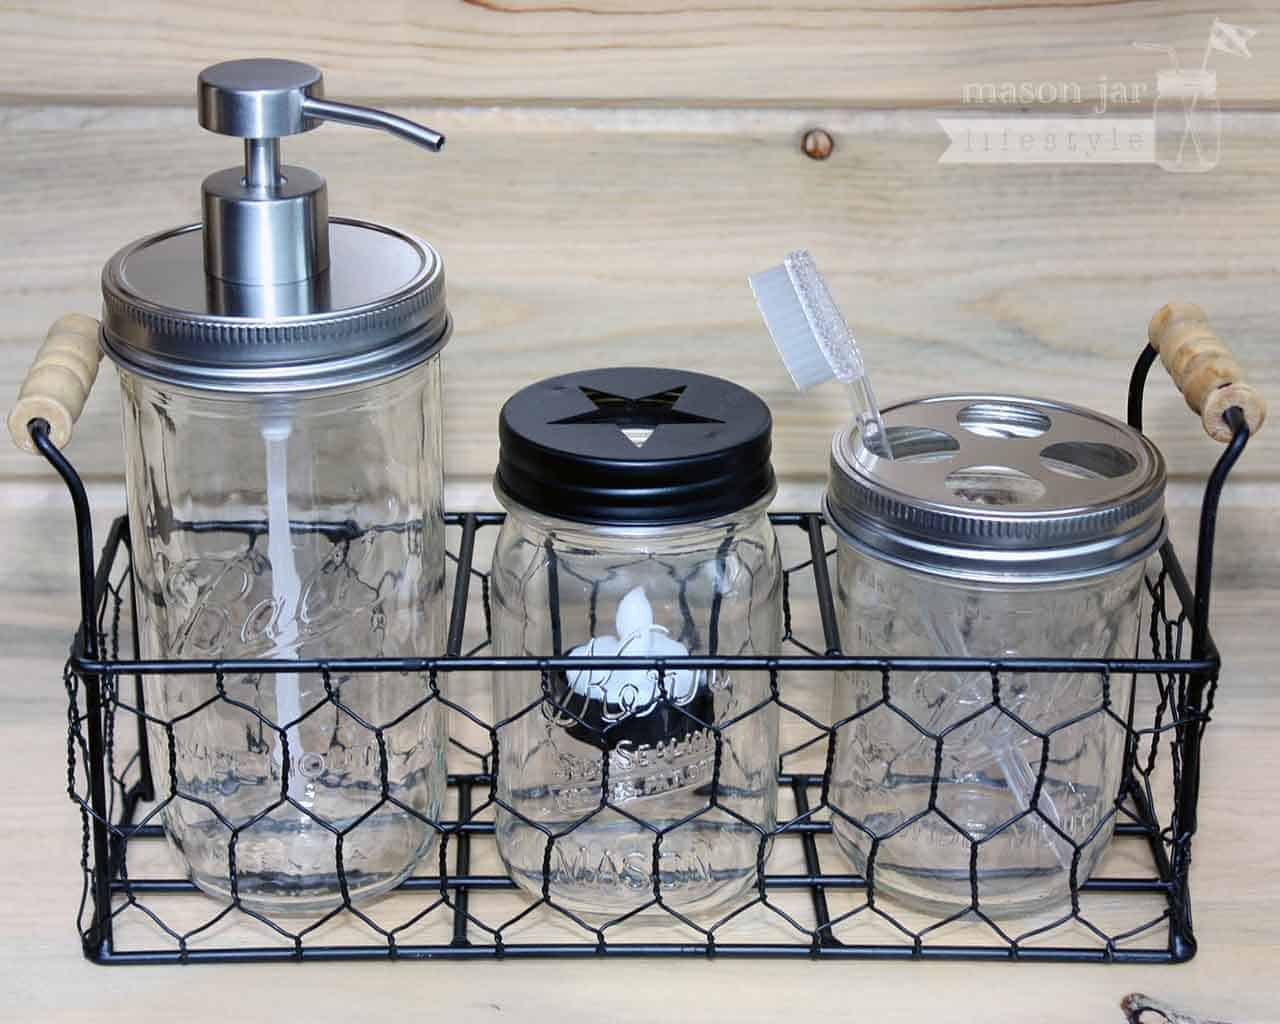 Three jar caddy with soap pump, toothbrush holder, and tea light candle holder in Ball and Kerr Mason jars